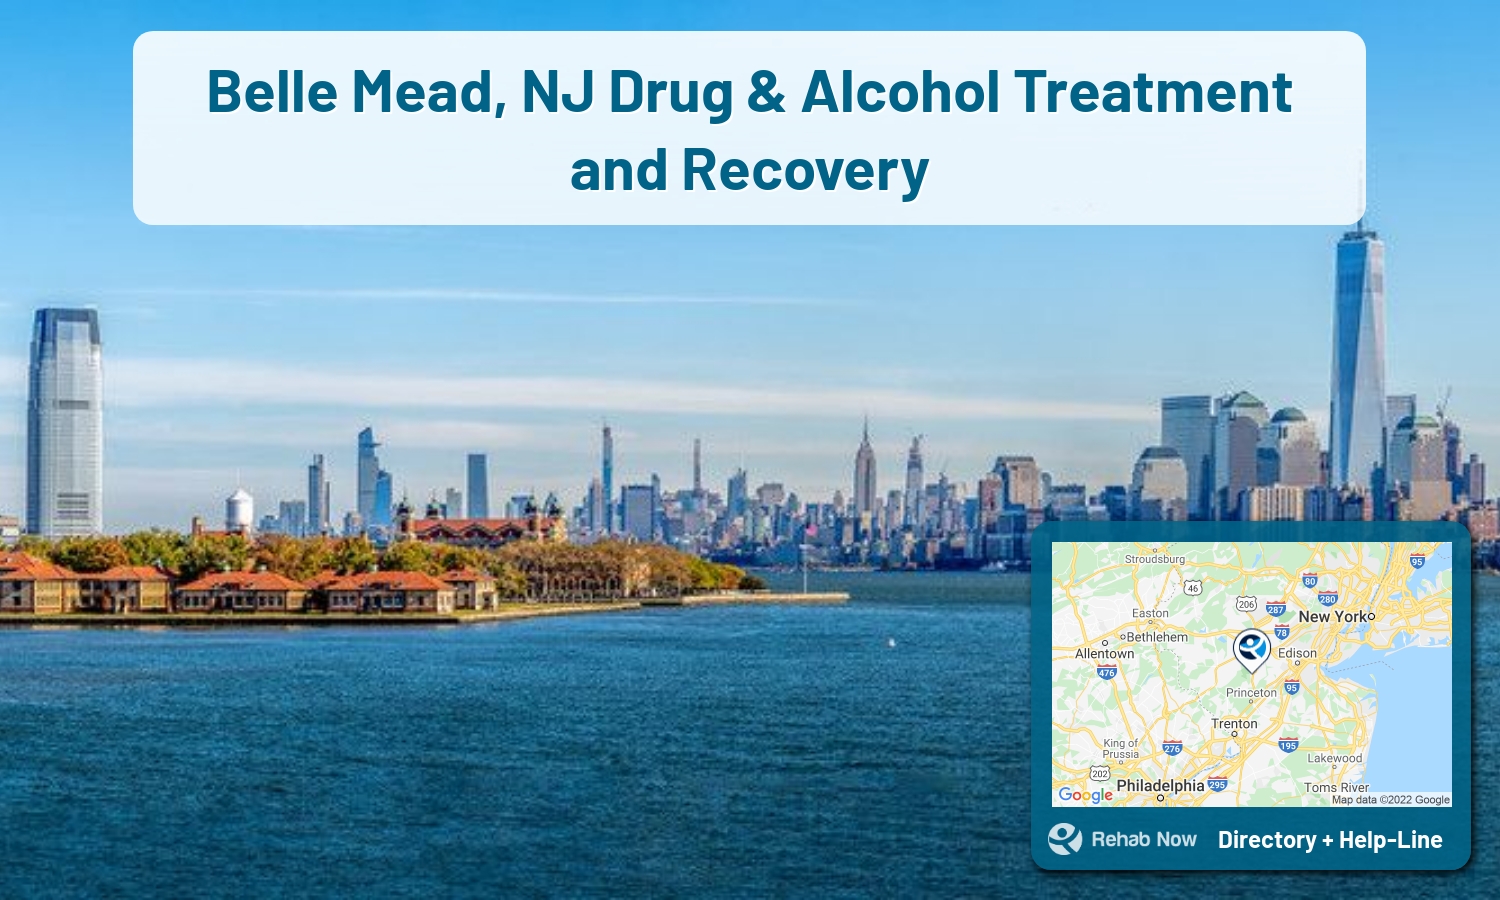 Our experts can help you find treatment now in Belle Mead, New Jersey. We list drug rehab and alcohol centers in New Jersey.